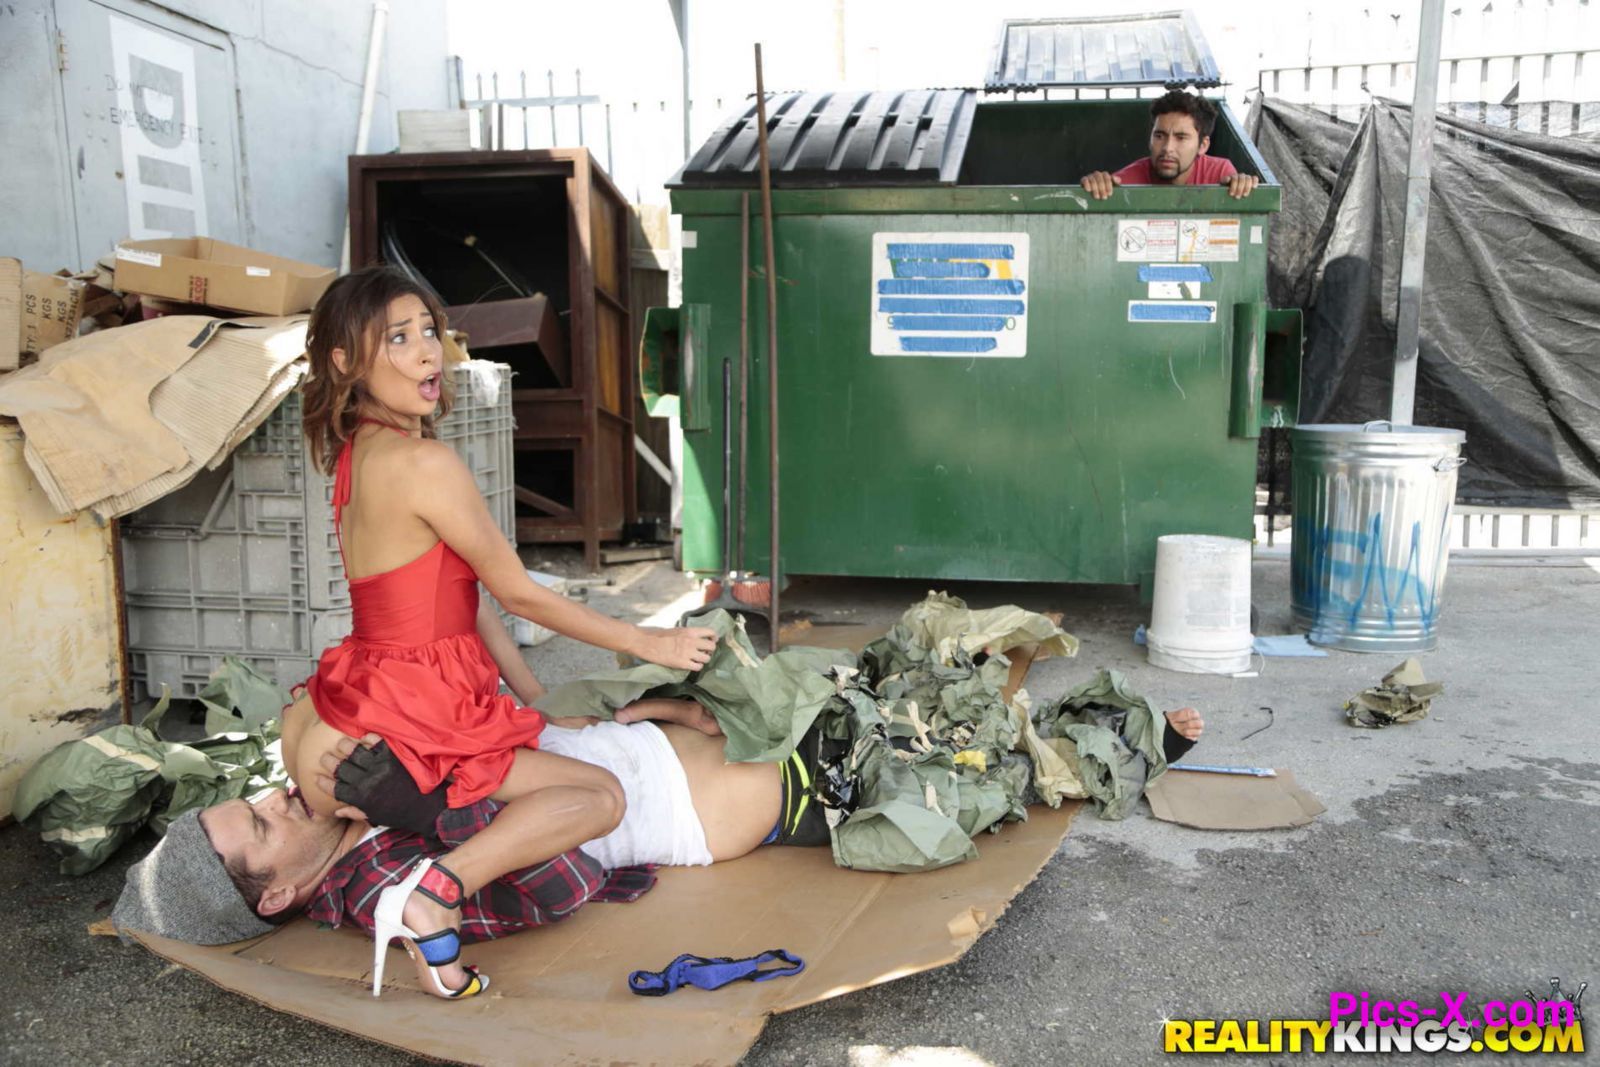 Dumpster Diving - Sneaky Sex - Image 39